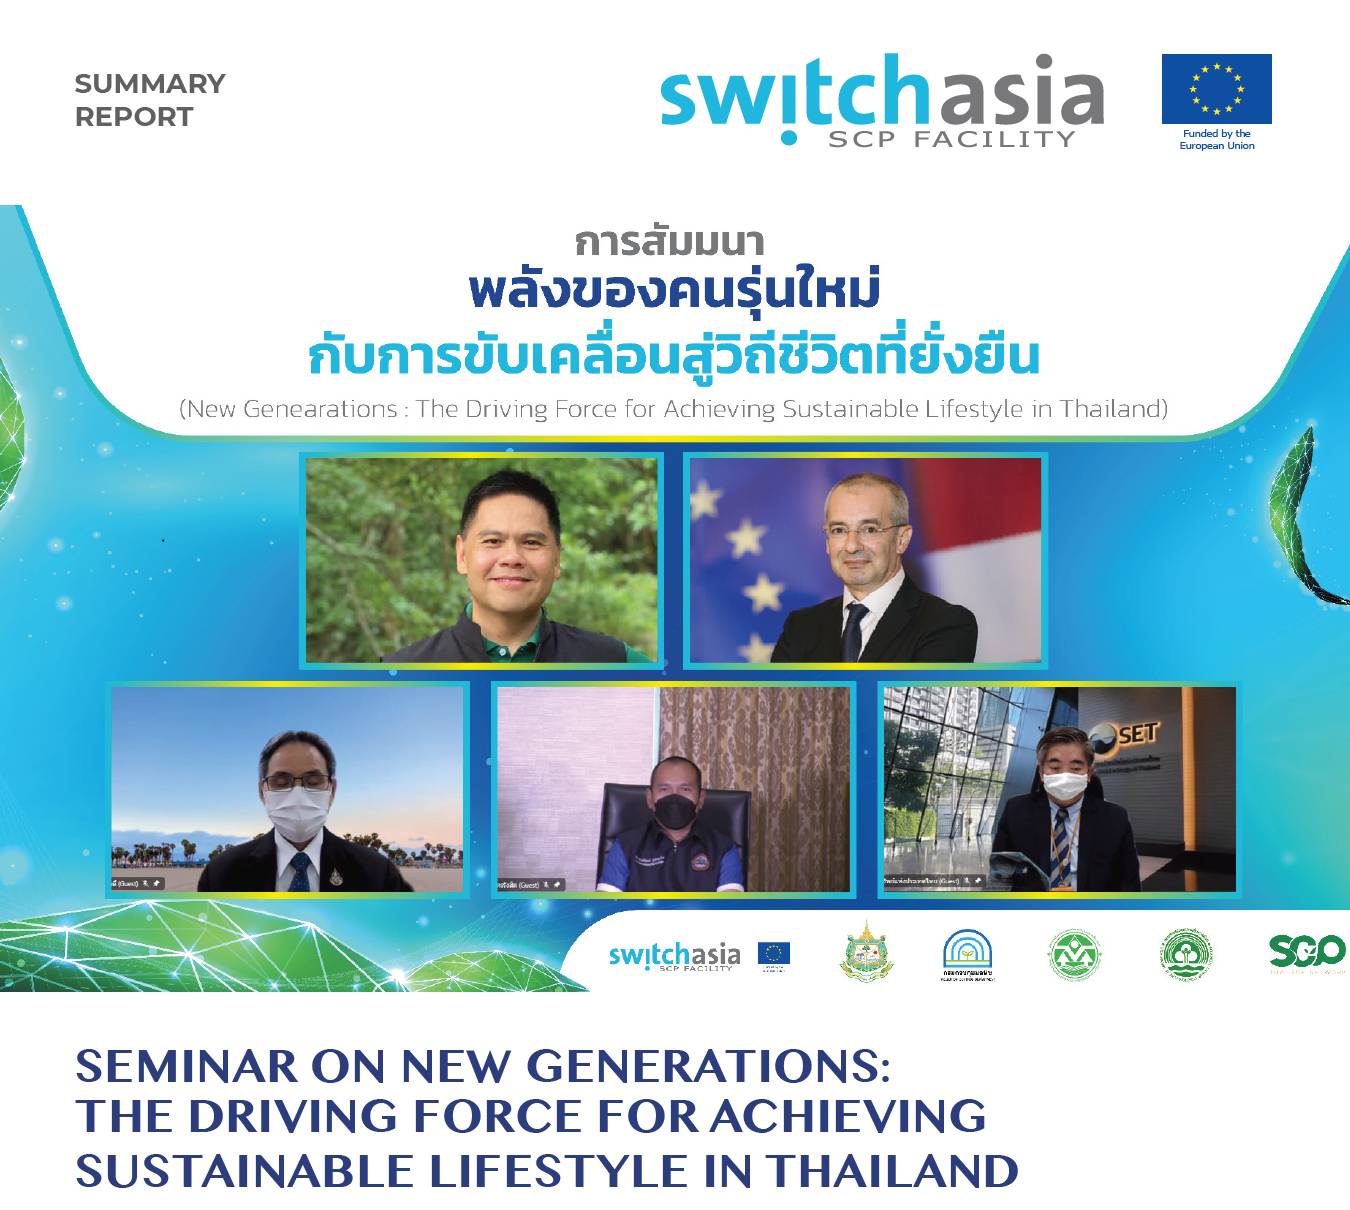 New Generations: The Driving Force for Achieving Sustainable Lifestyle in Thailand